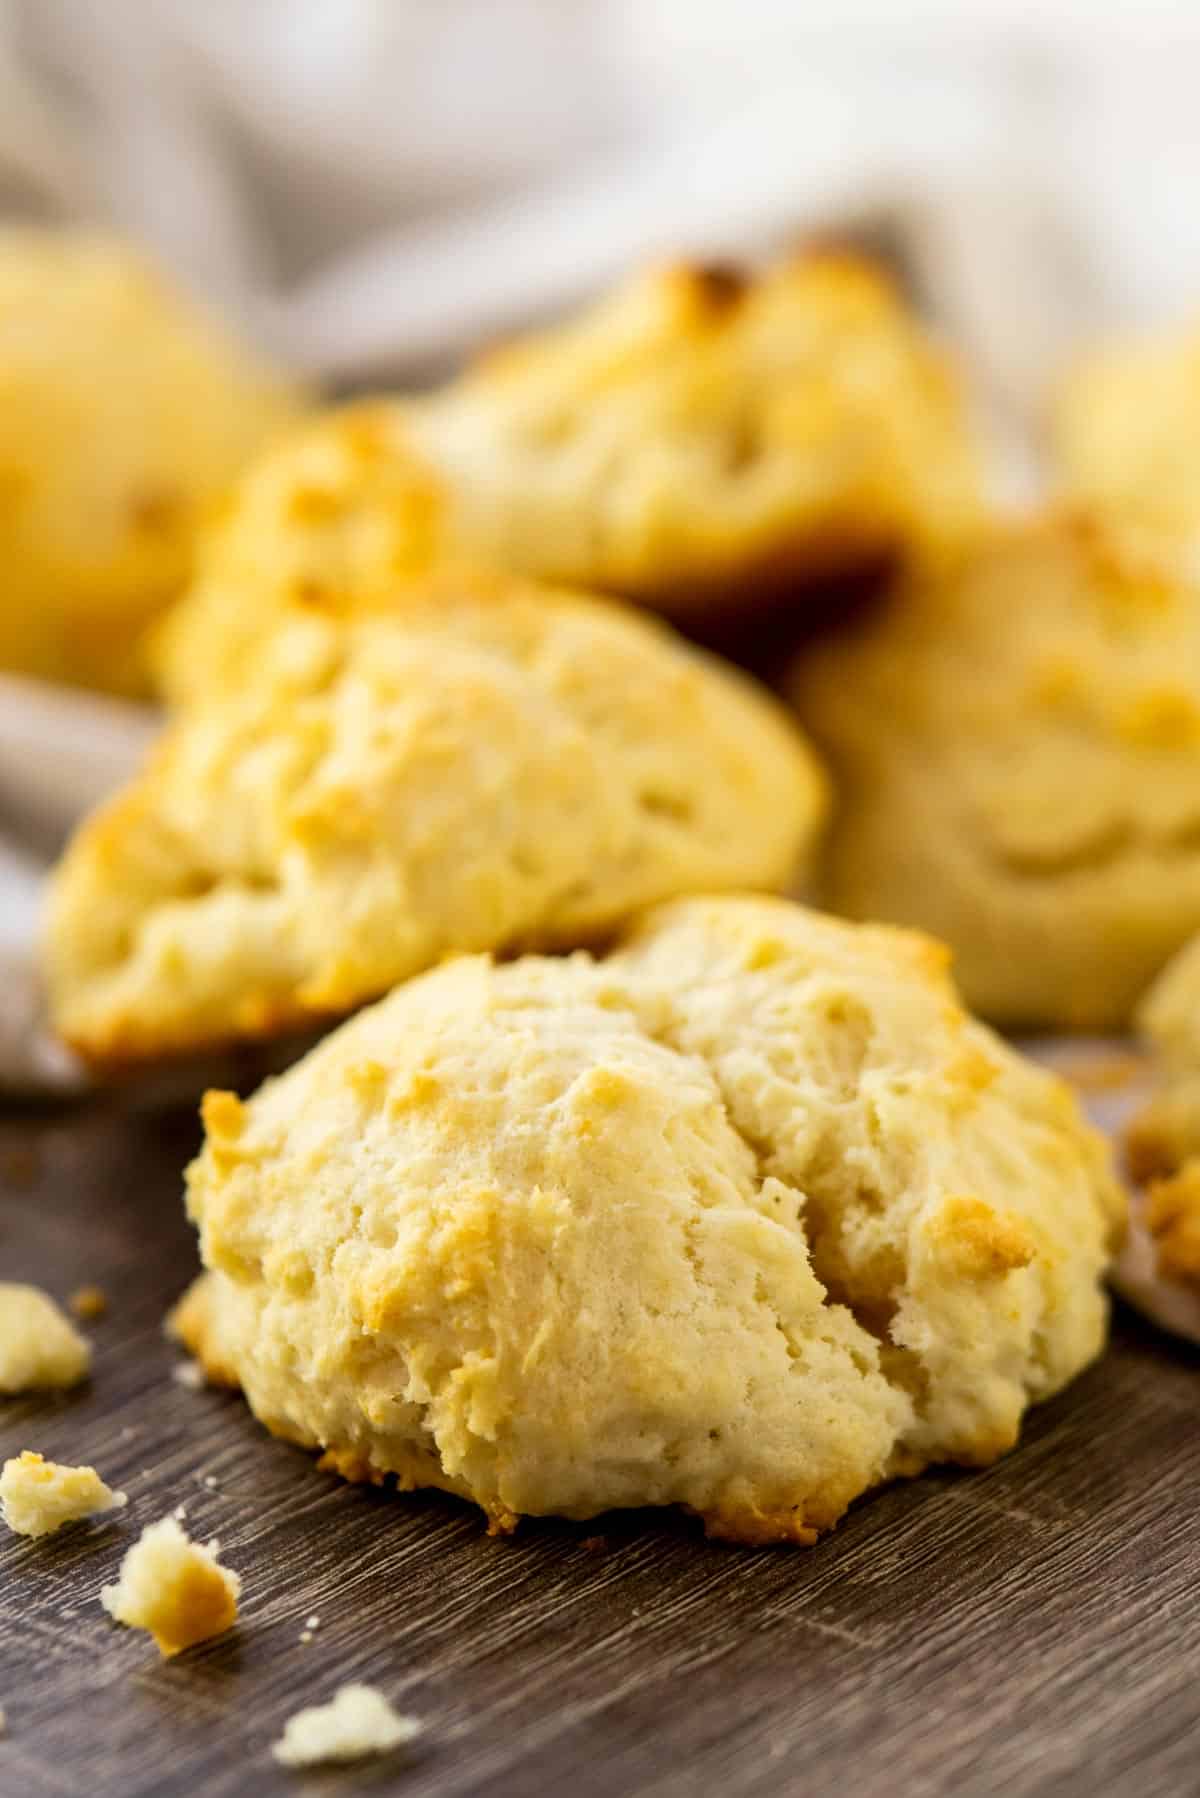 Baked cream biscuits on a cutting board